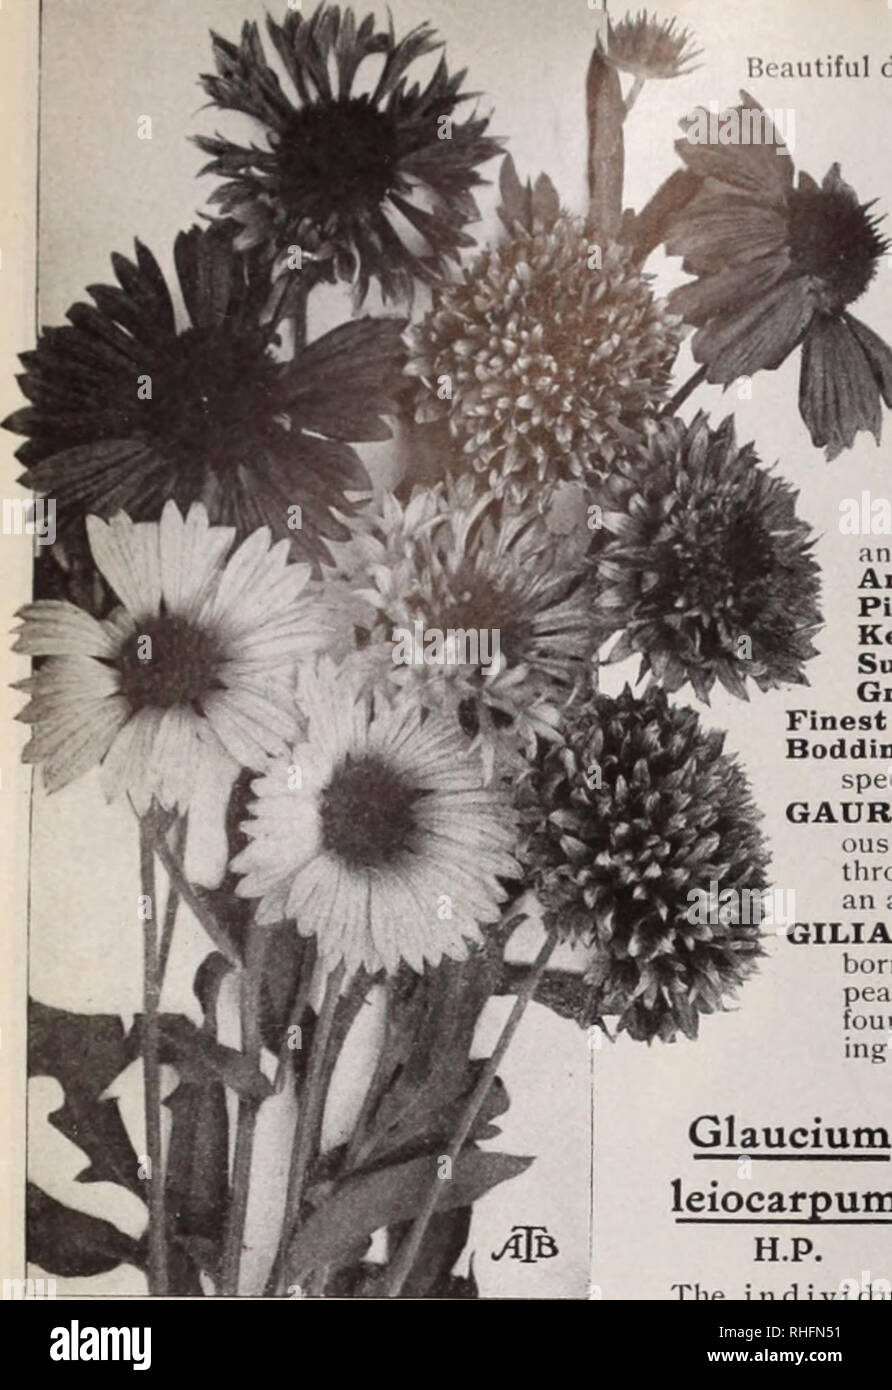 . Boddington's quality bulbs, seeds and plants / Arthur T. Boddington.. Nursery Catalogue. 2G Arthur T.Boddington, 342 West 14th St.. New Vork City. Francoa ramosa (Bridal Wreath) g.P. Beautiful decorative plant, which is of the easiest possible greennouse culture. During the summer months it produces a large number of elegant sprays of pure white llowers. Excellent for cutting. Height ft. Pkt. 25 cts. Pkt. FRANCOA glabrata. H.H.P. The flowers are of the purest snow- white, are very freely produced on large-branched spikes 3 pkts. for $1. .$0 35 FDNKIA (Plantain Lily). H.P. aft. Summer. Albo m Stock Photo